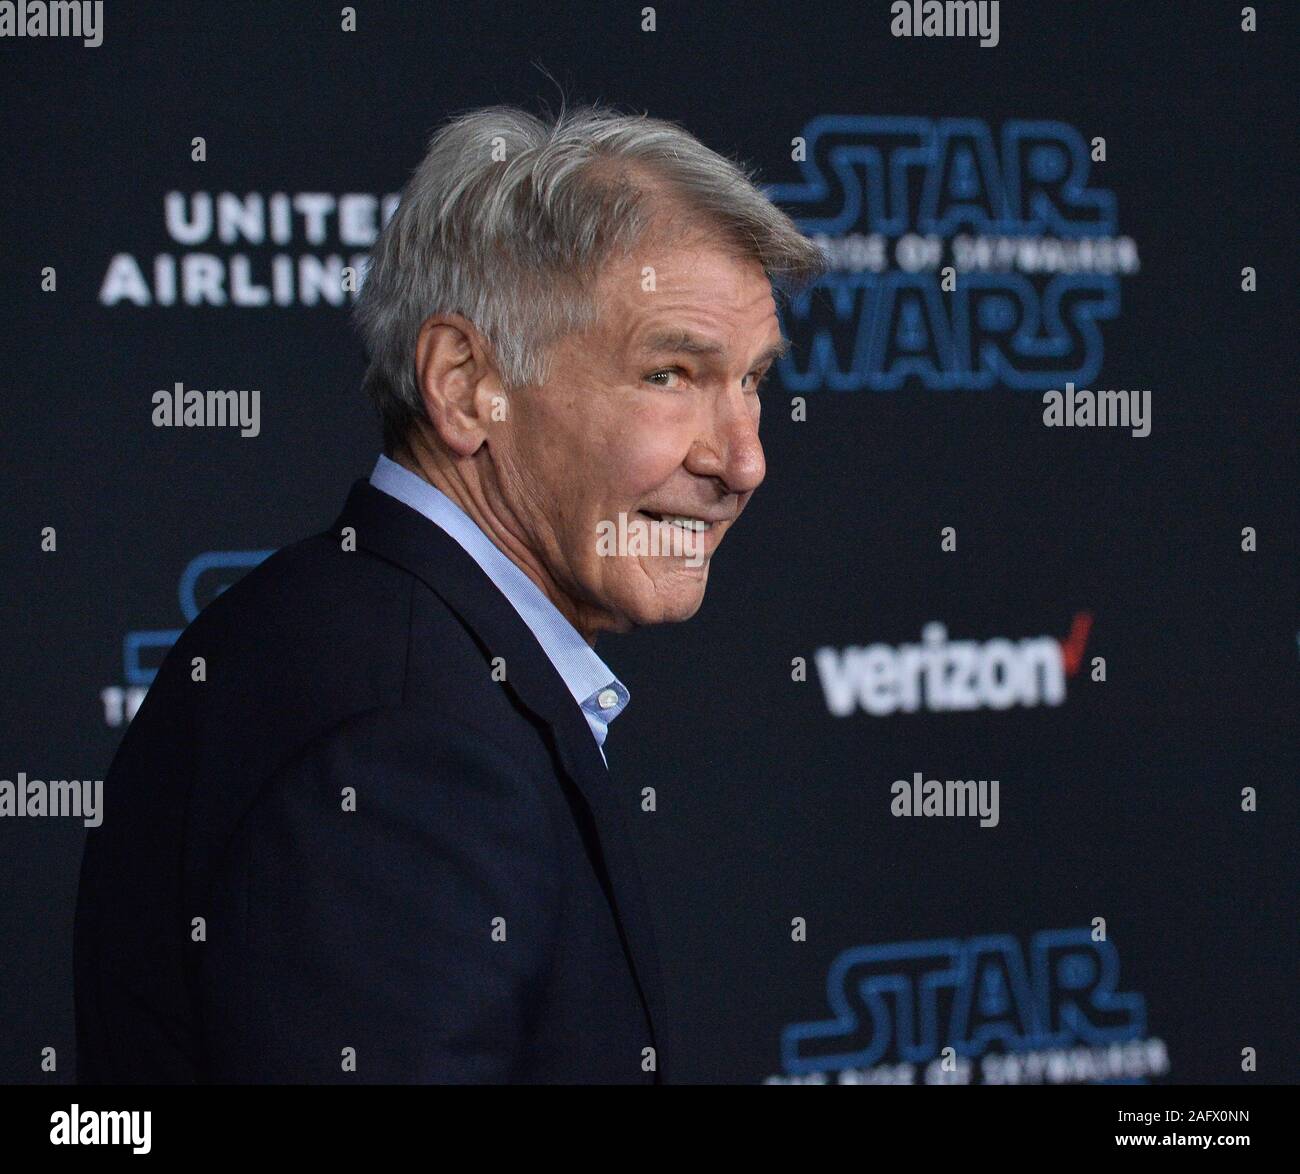 Los Angeles, United States. 17th Dec, 2019. Actor Harrison Ford attends the premiere the motion picture sci-fi fantasy 'Star Wars: The Rise of Skywalker' at the TCL Chinese Theatre in the Hollywood section of Los Angeles on Monday, December 16, 2019. Storyline: The surviving Resistance faces the First Order once more in the final chapter of the Skywalker saga. Photo by Jim Ruymen/UPI Credit: UPI/Alamy Live News Stock Photo